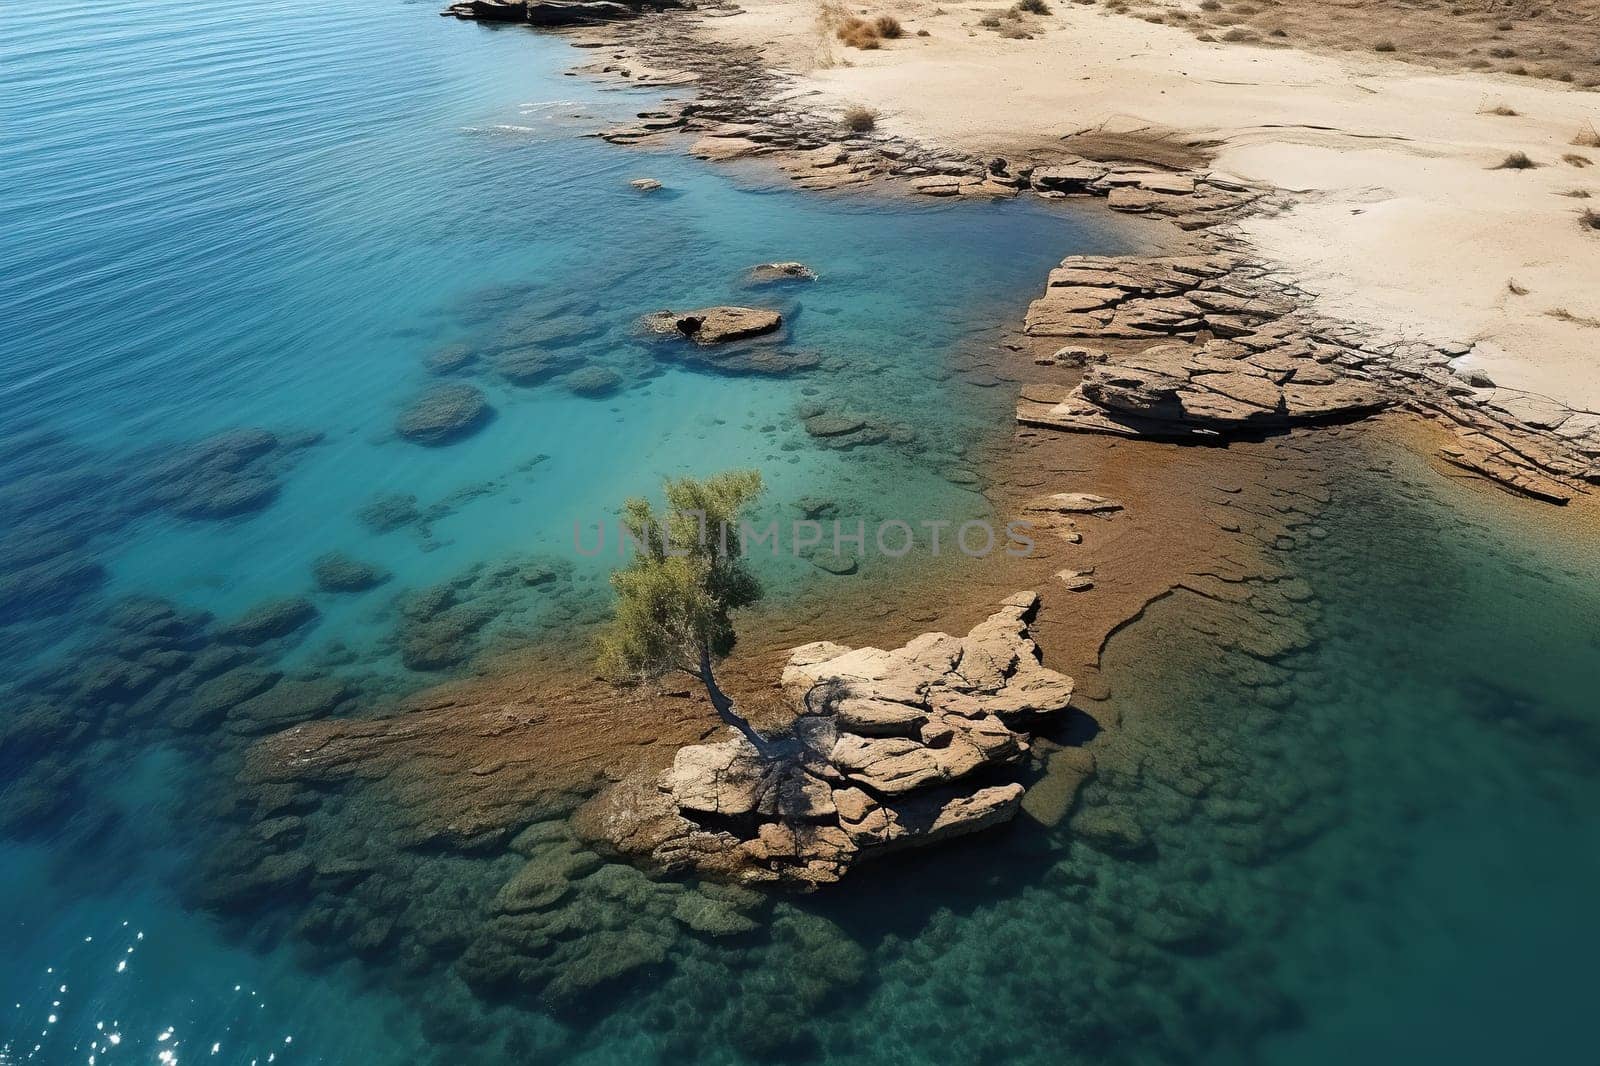 A tree on a small rocky island in the water.